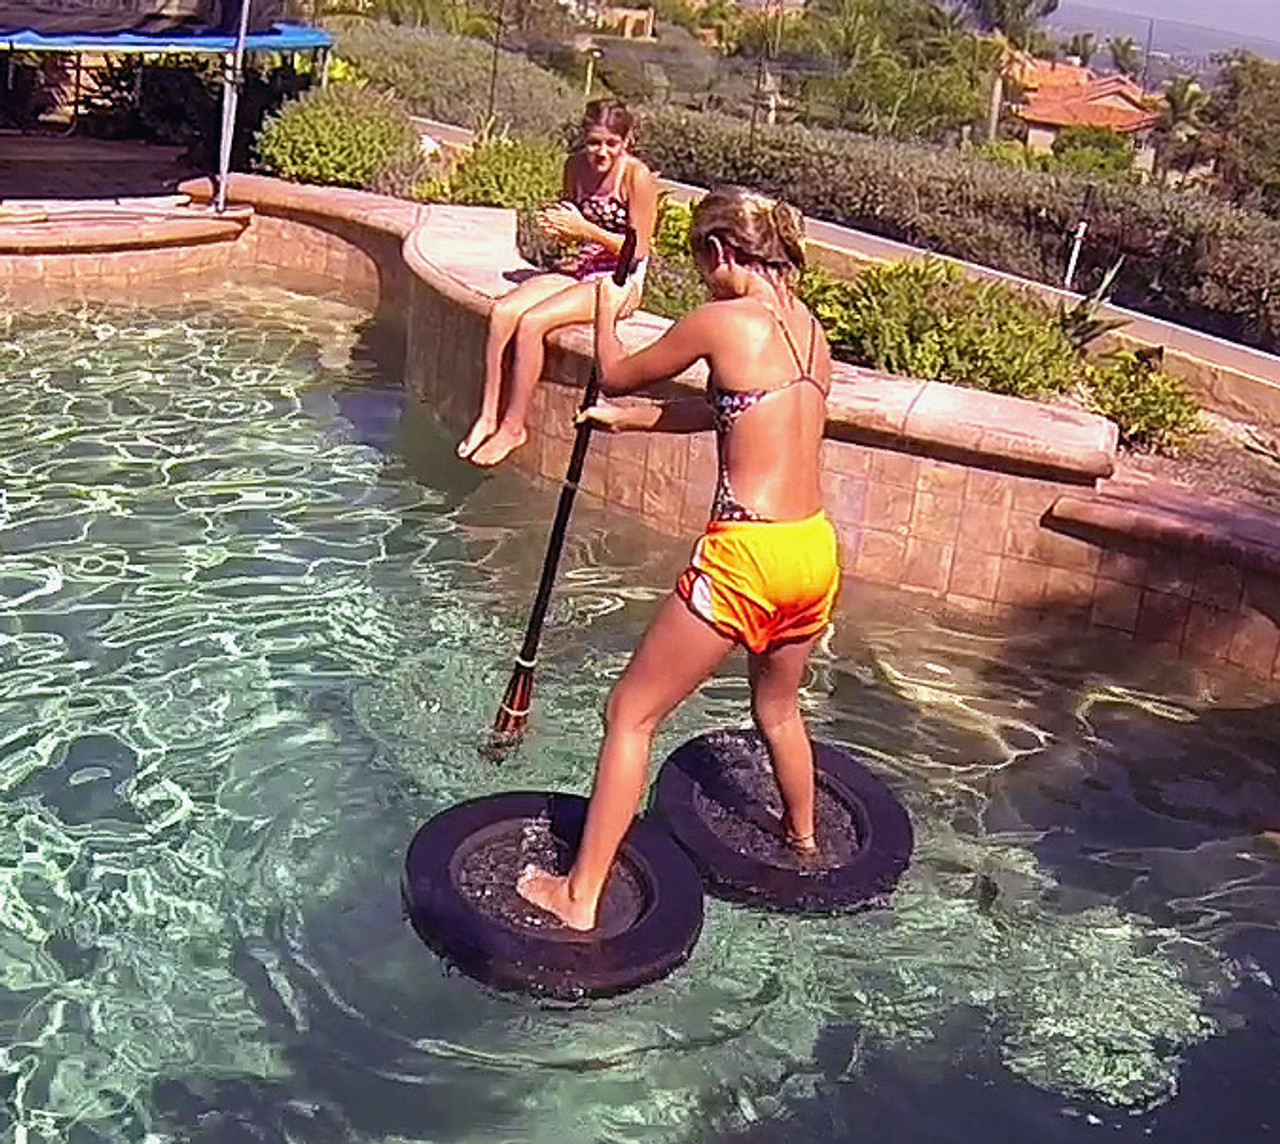 Ninja Water Shoes 95 lbs. Under - Glide On Top Of The Water